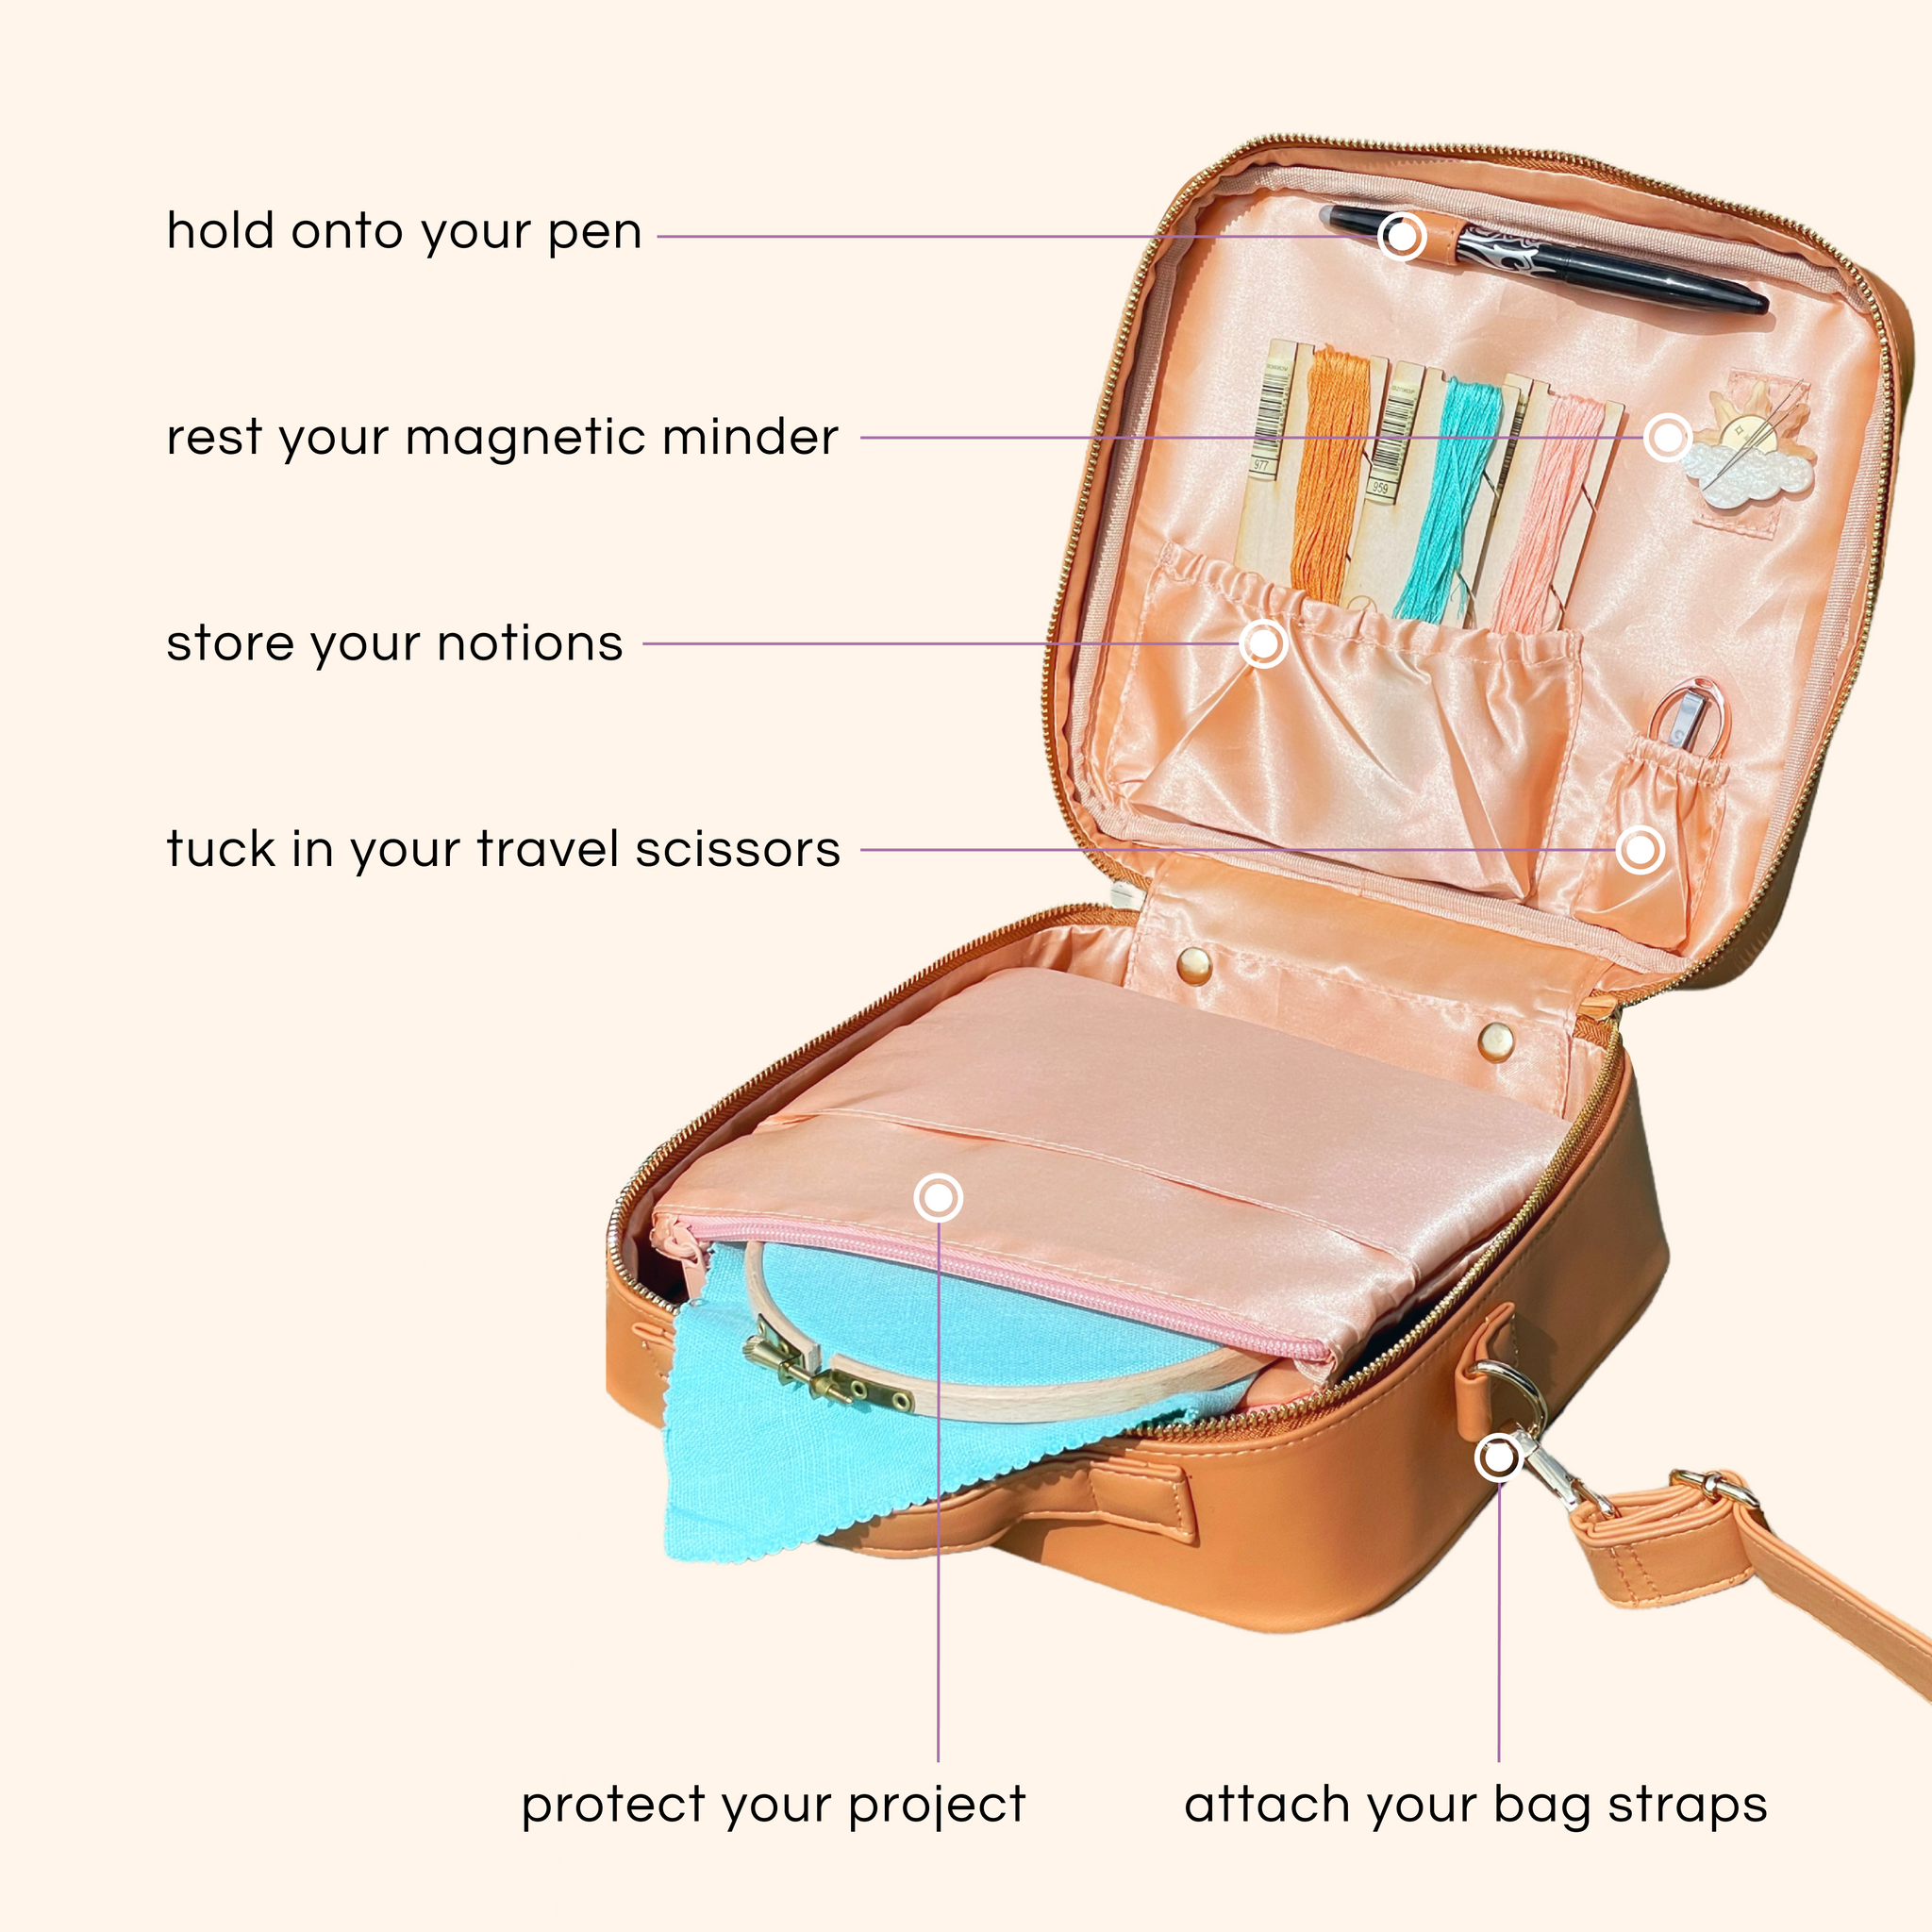 Threading My Way: Travel Storage Bags - made from a Pillowcase